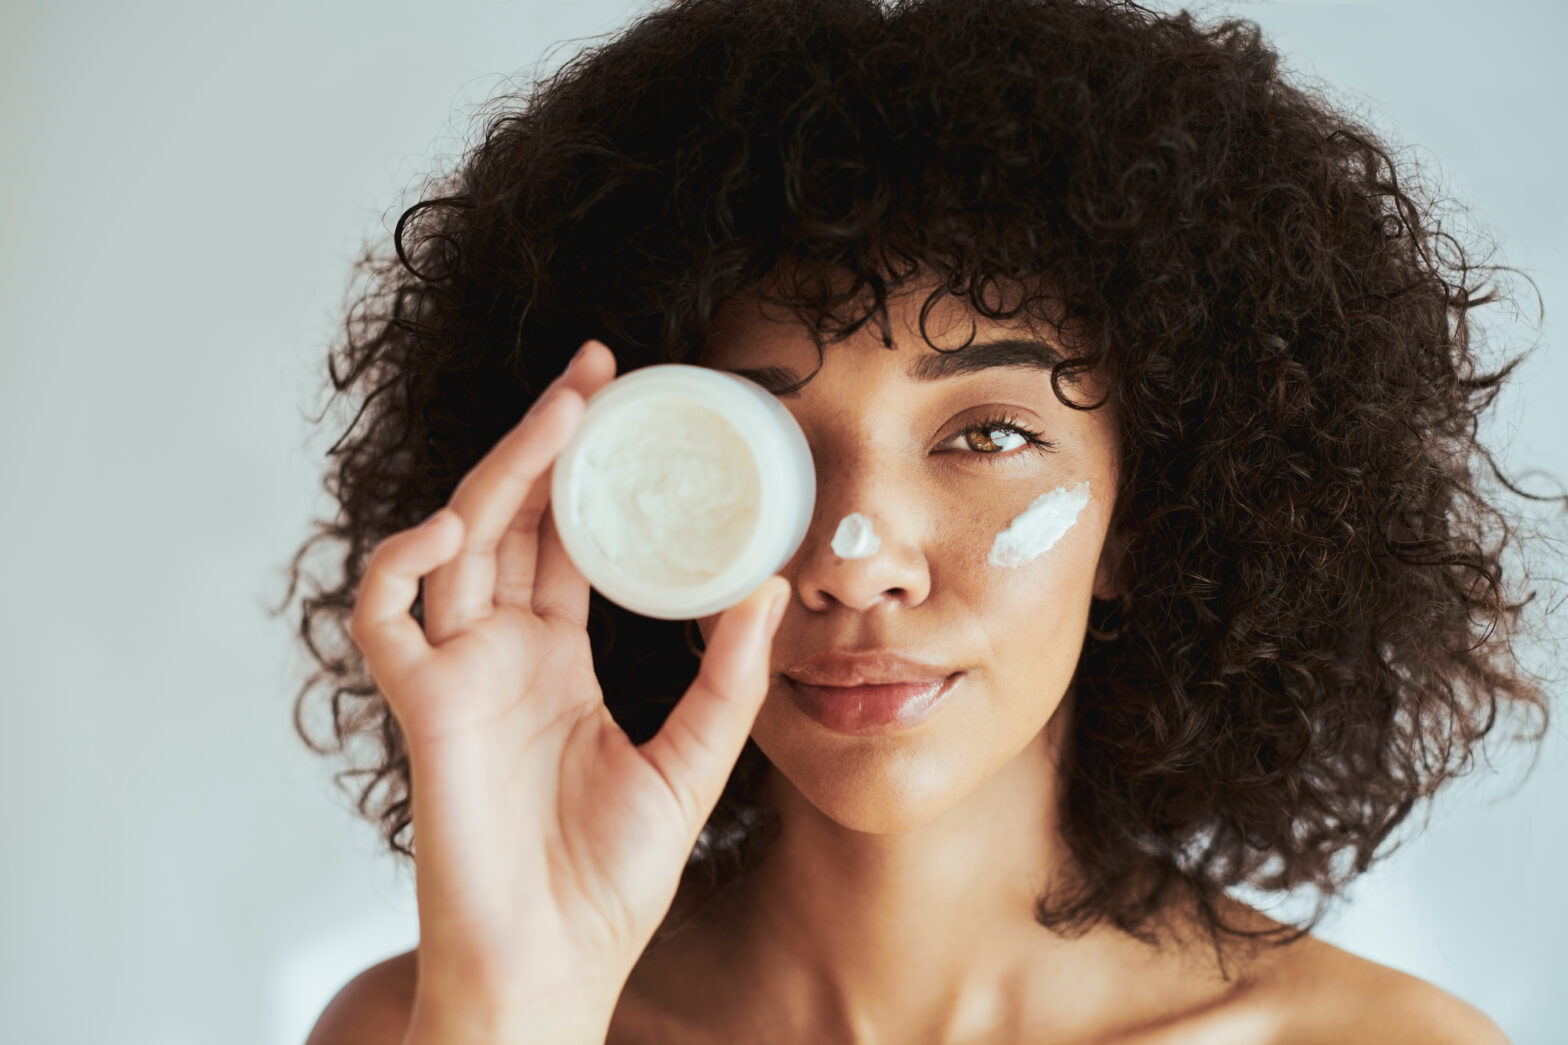 can shea butter and cocoa butter be used inerchangeably?